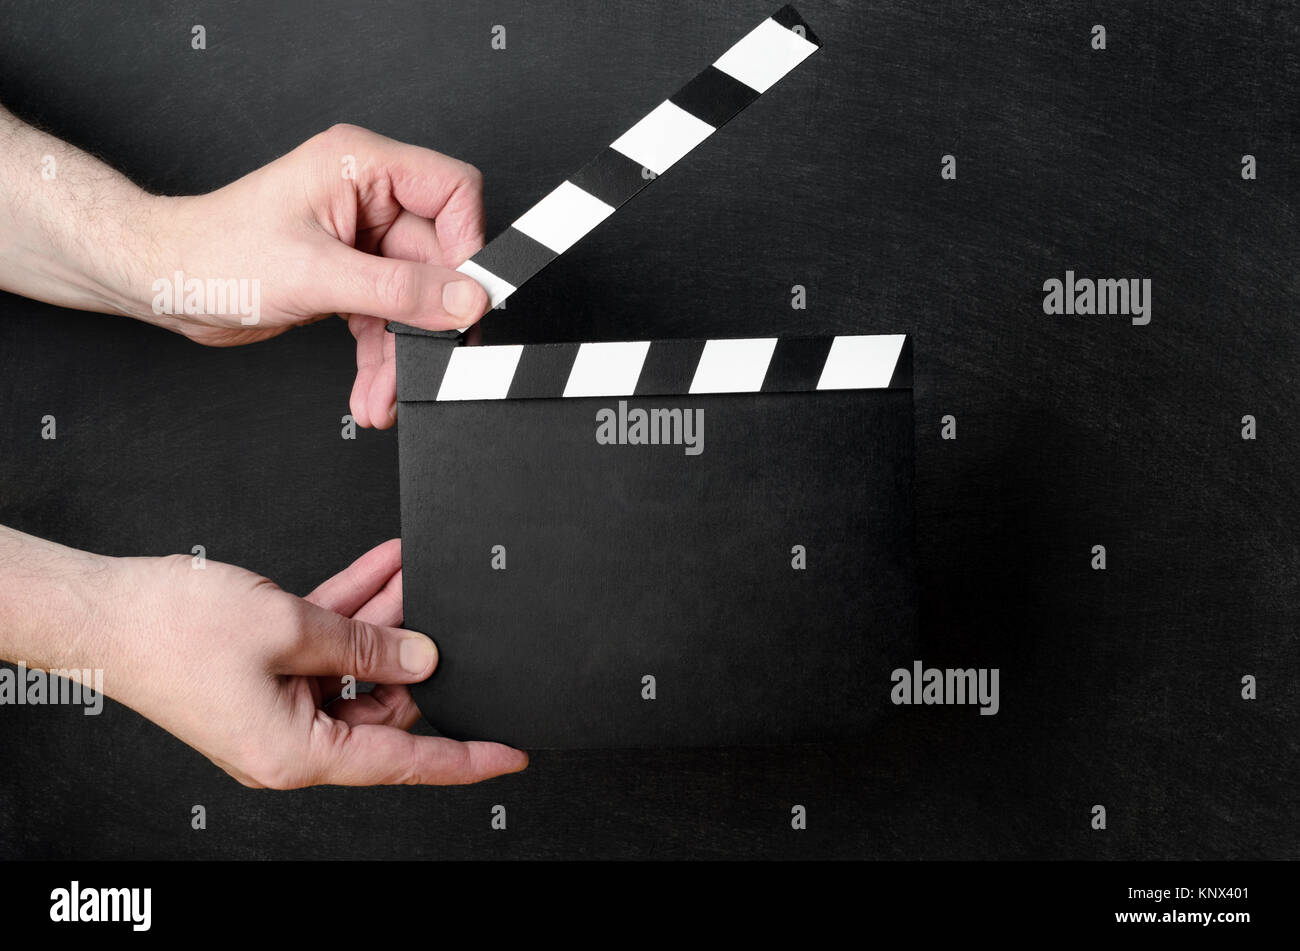 A blank clapperboard held open as if about to snap shut between the hands of a male operative with black chalkboard background. Stock Photo